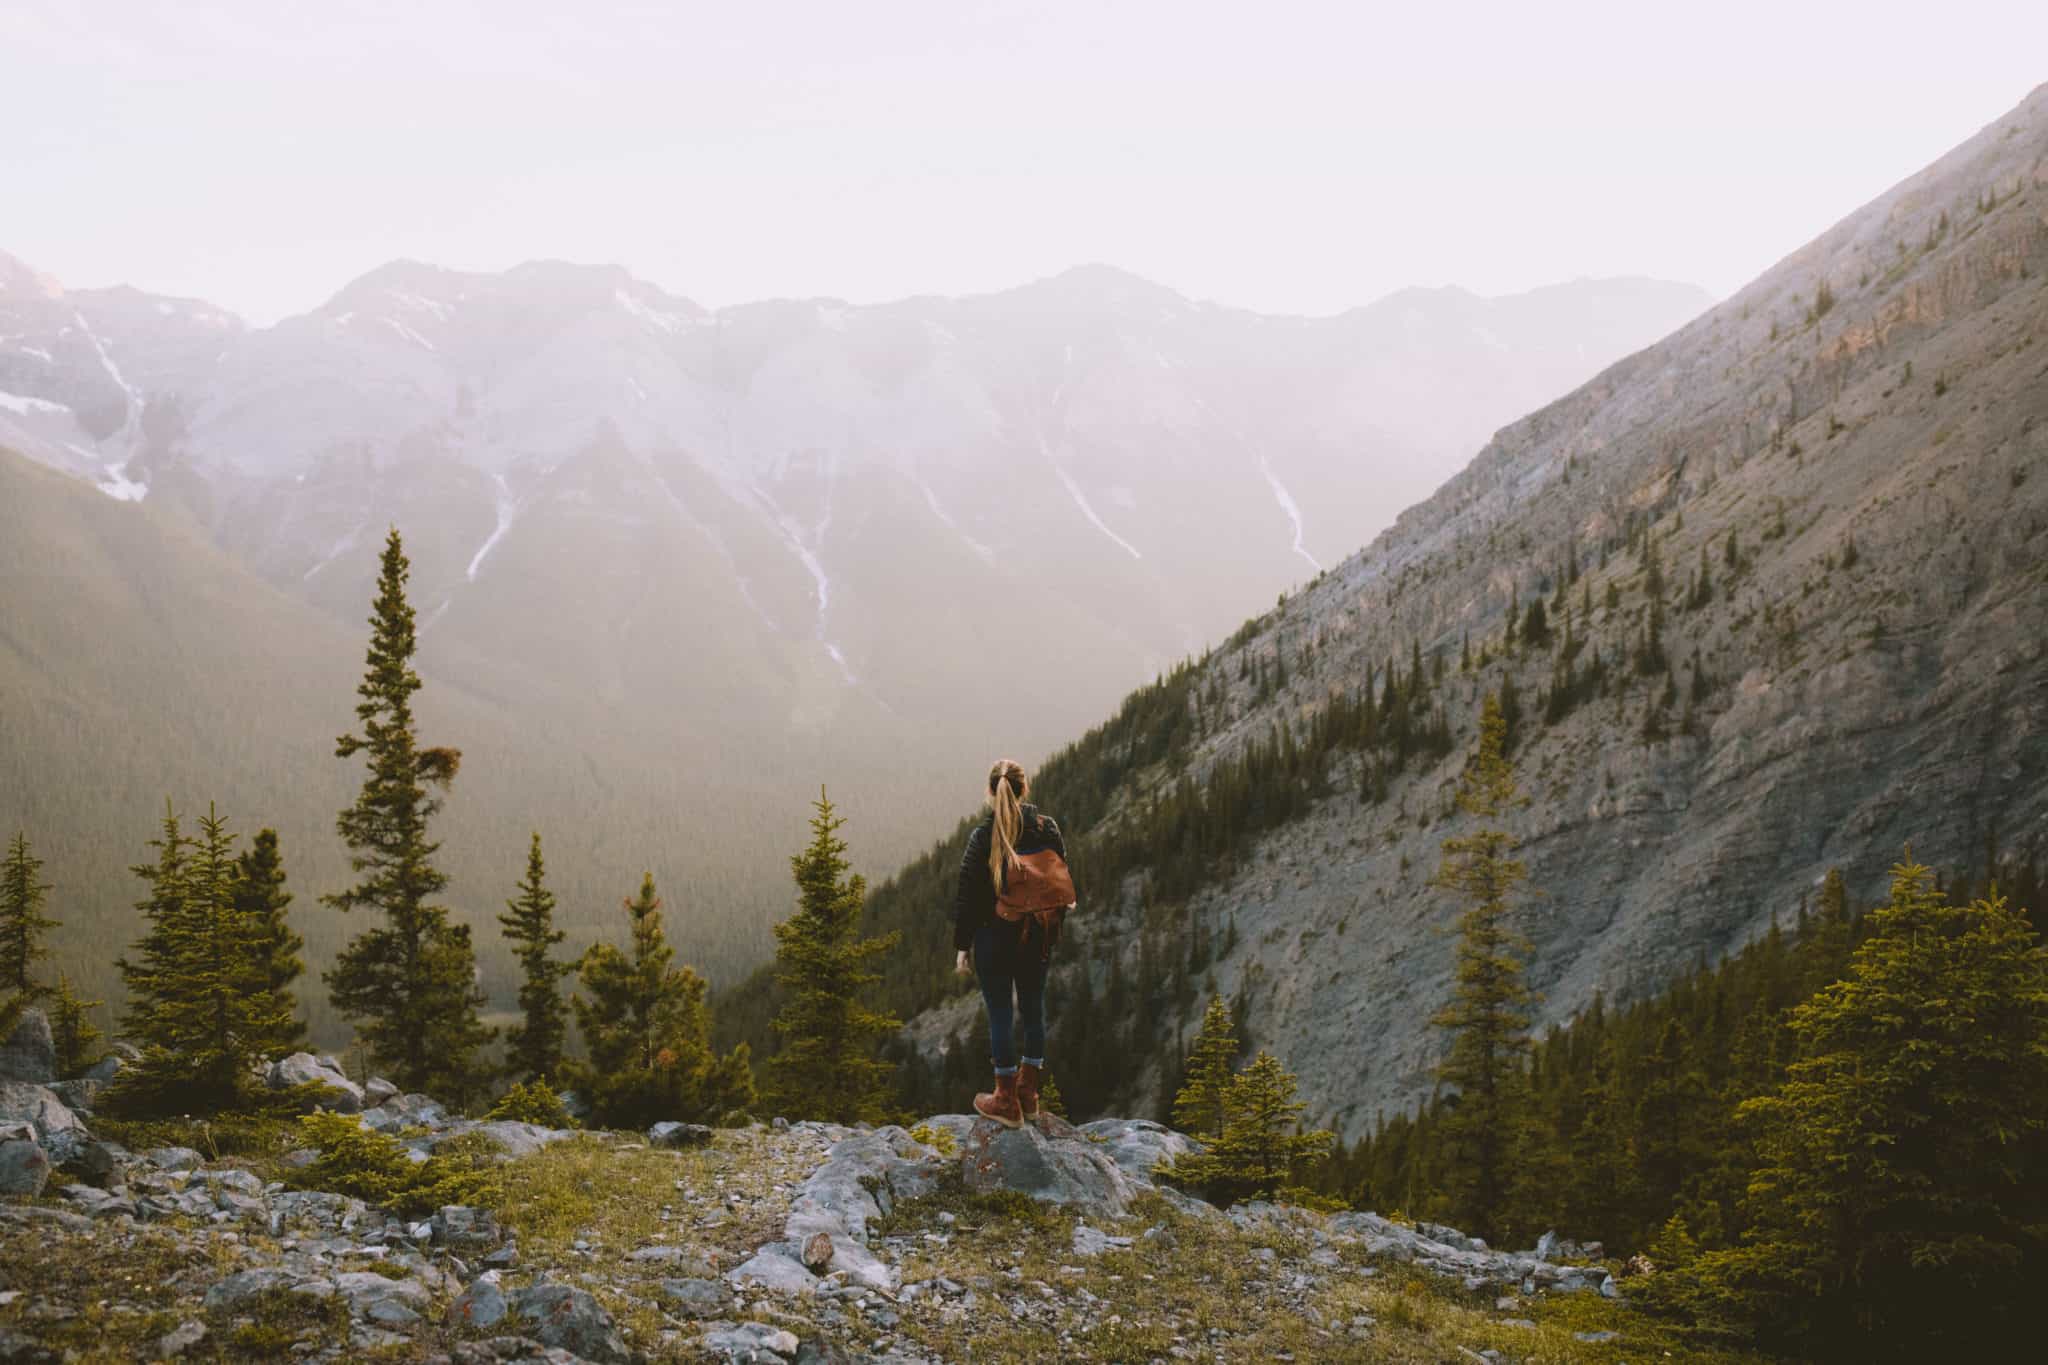 The Top 10 Instagram-Worthy Photo Spots In Banff And EXACTLY Where to Find Them